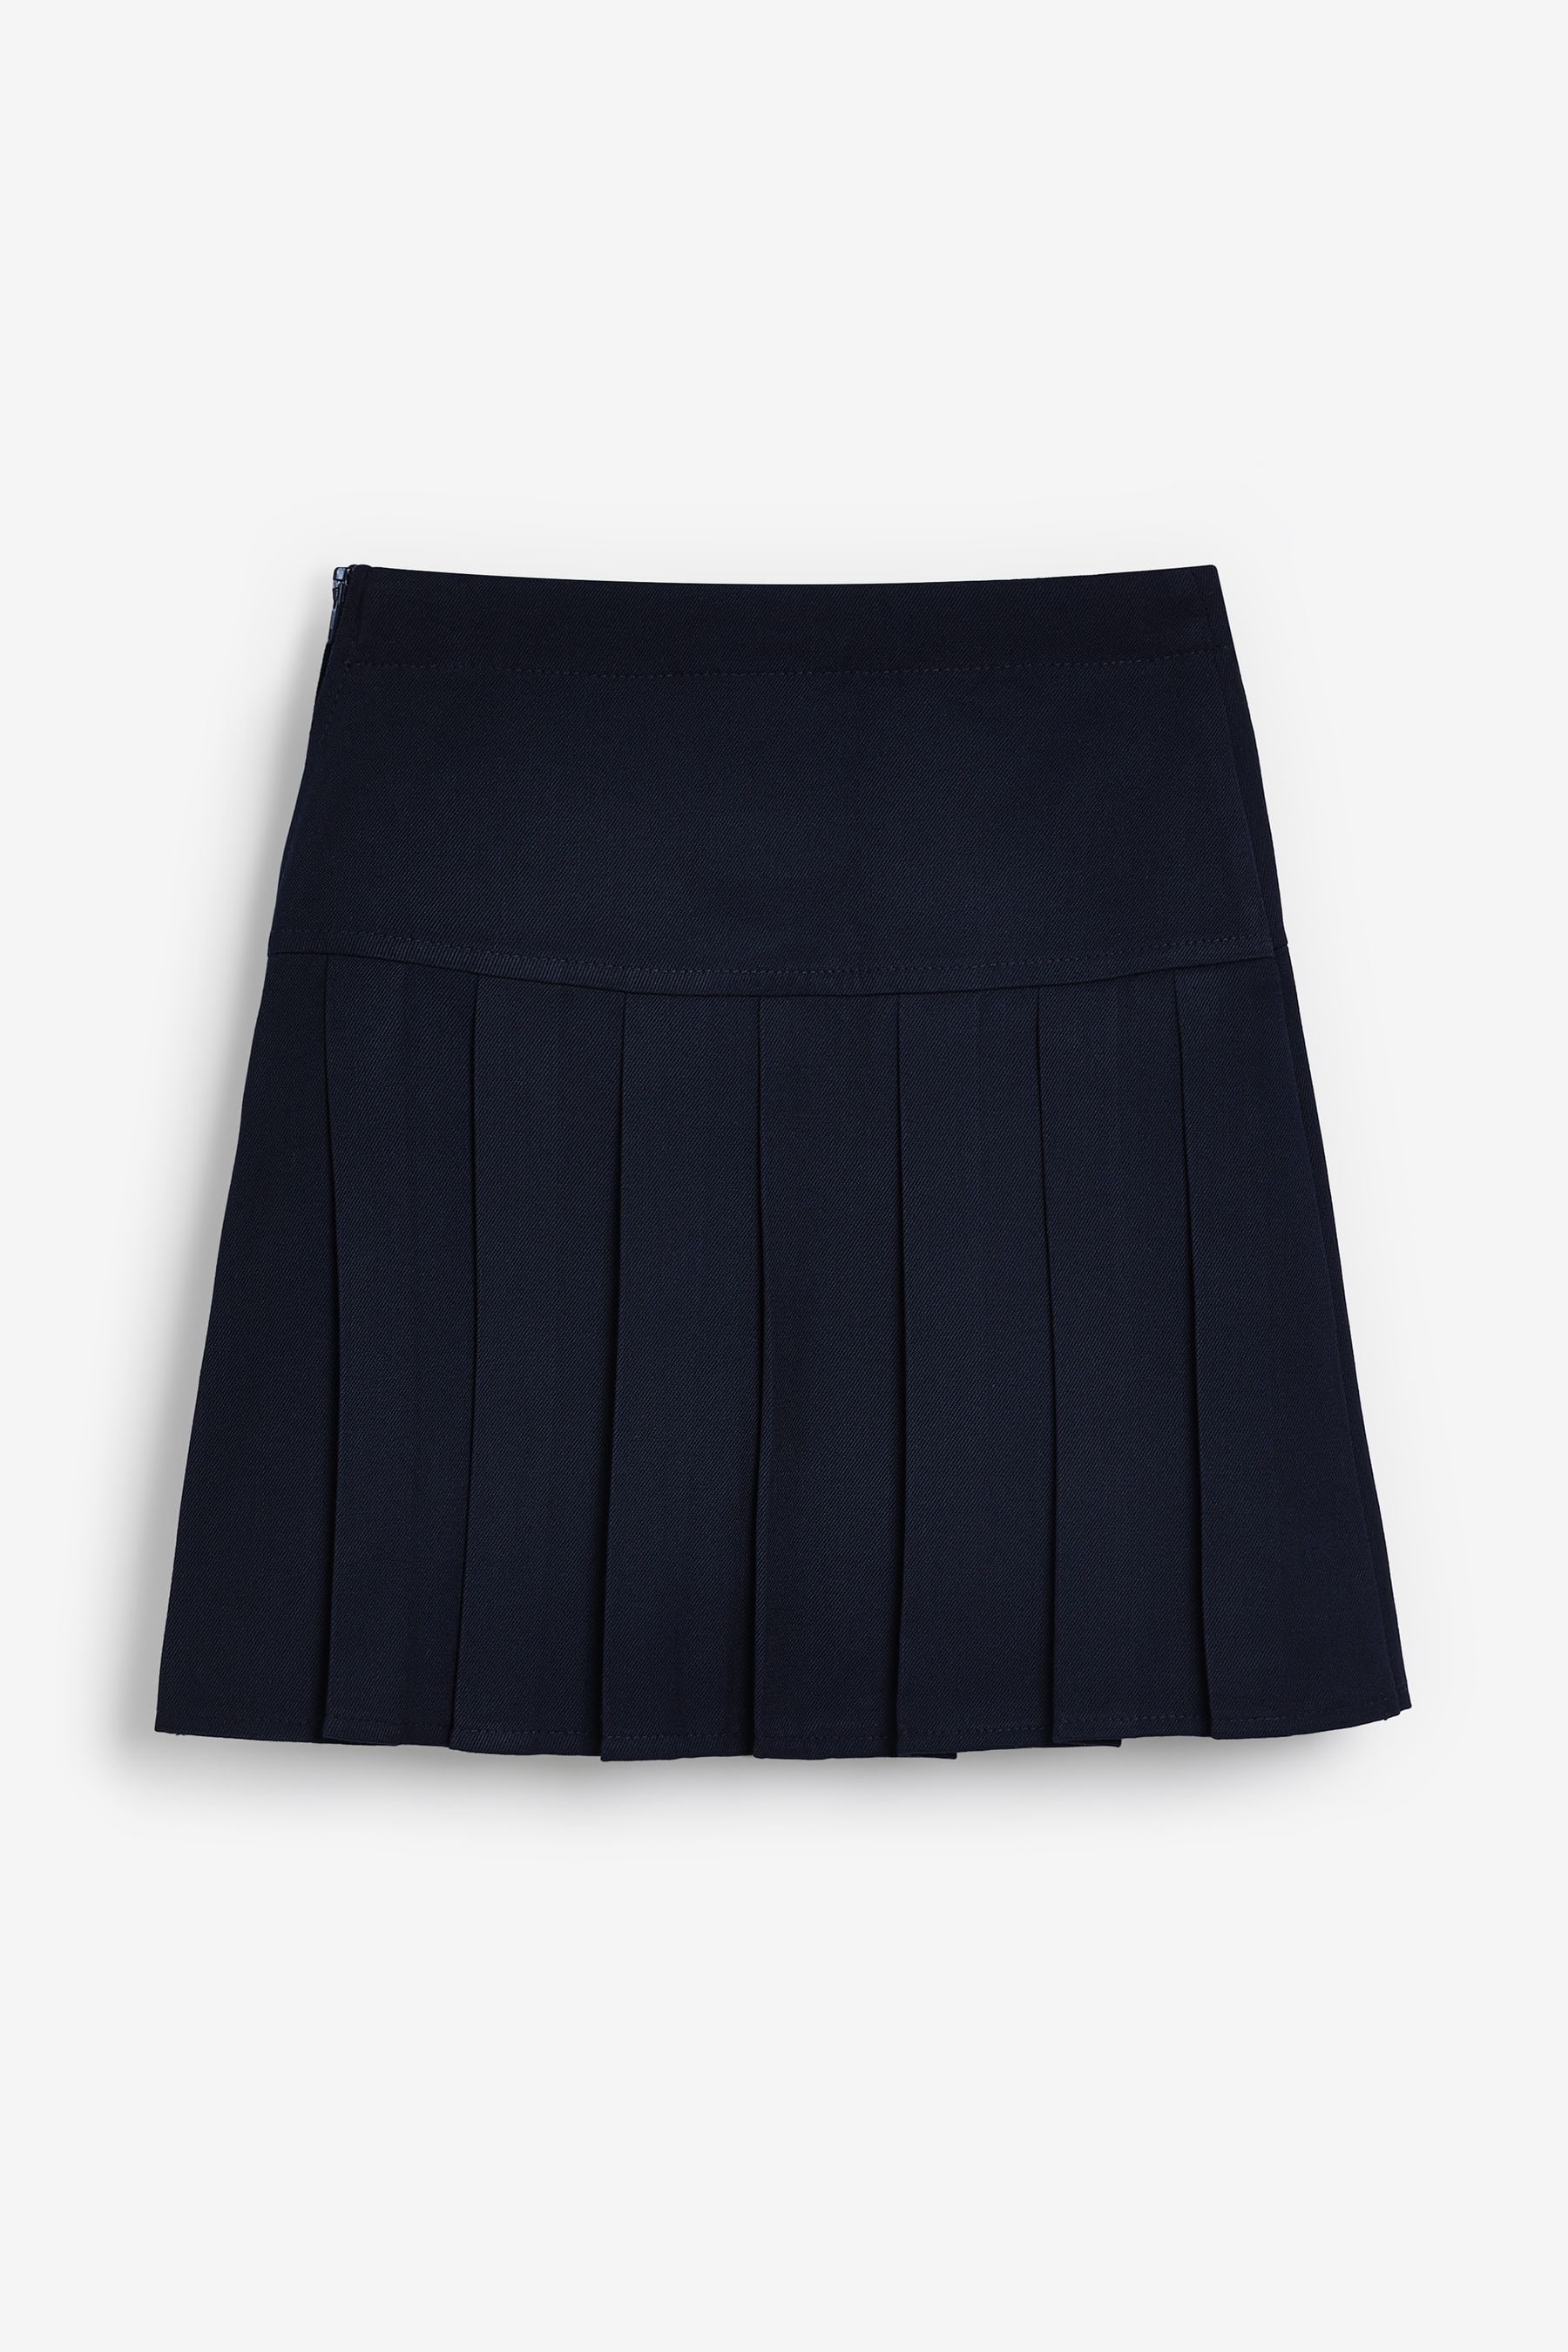 Buy Pleat Skirts 2 Pack (3-16yrs) from Next Australia